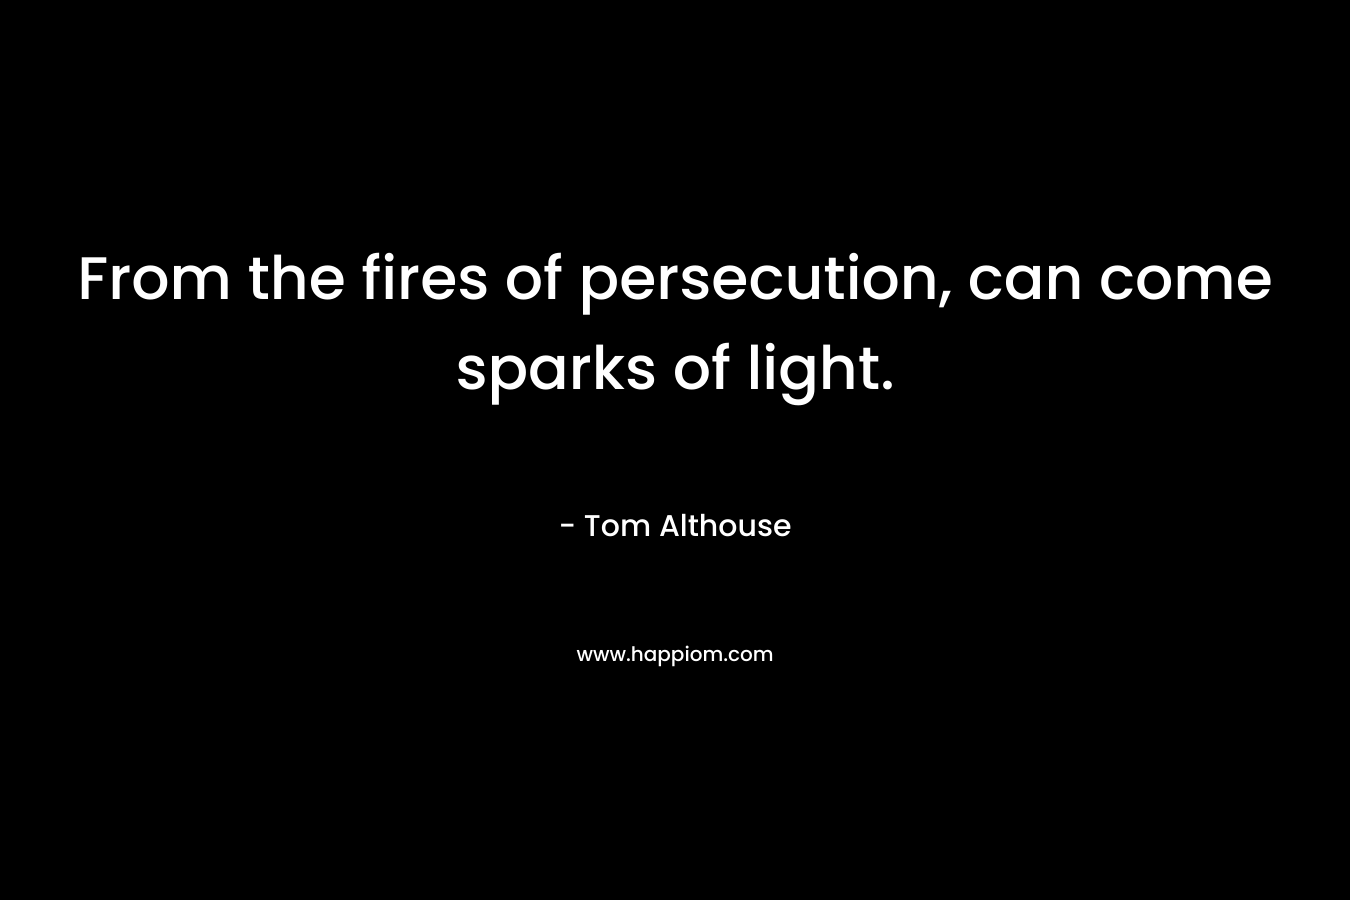 From the fires of persecution, can come sparks of light.